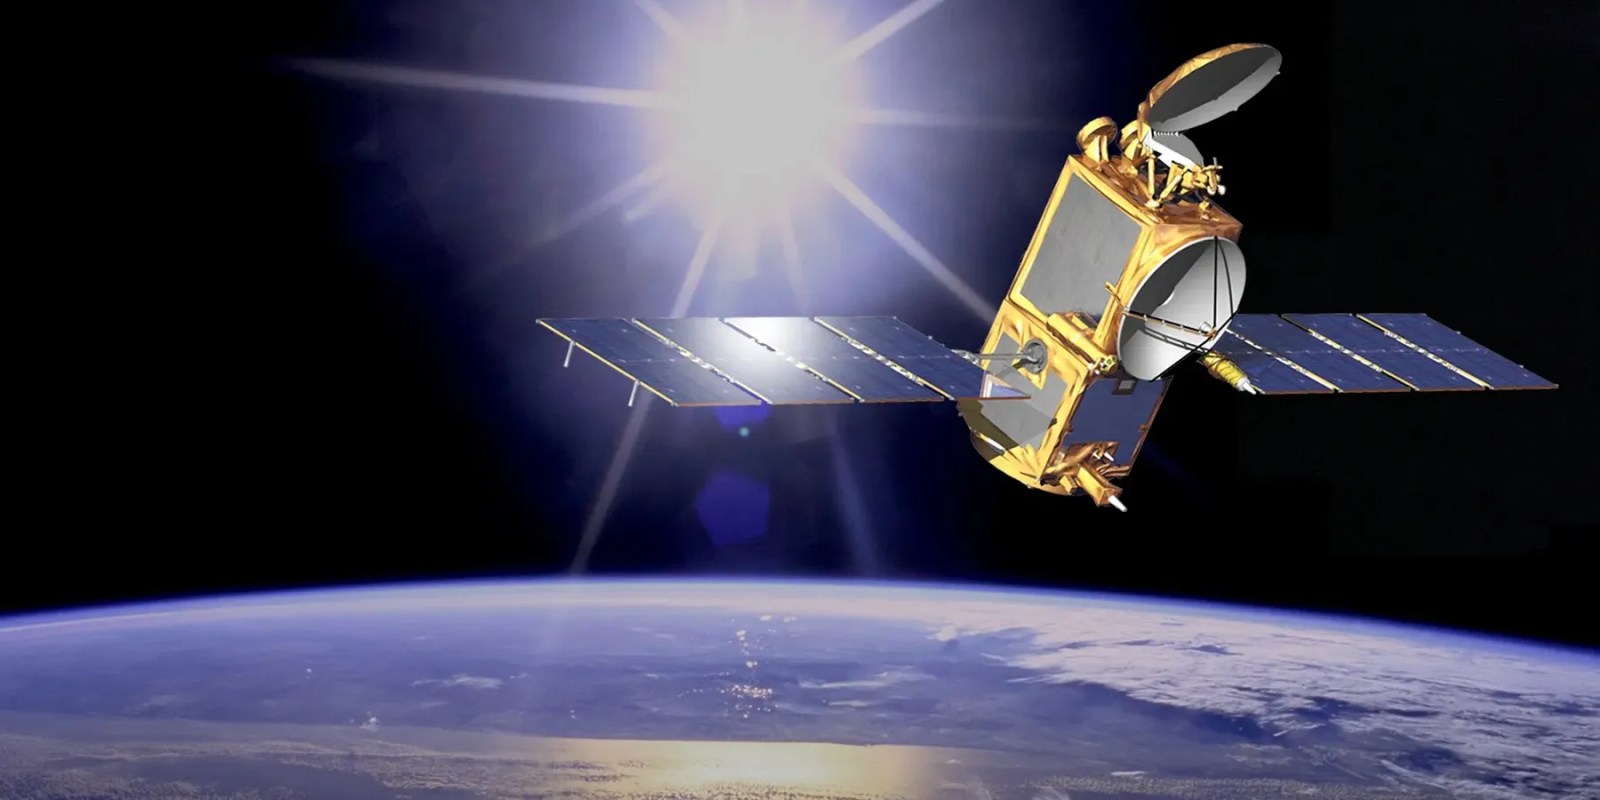 AT&T satellite service for 5G phones on the way | Illustrative shot of NASA satellite